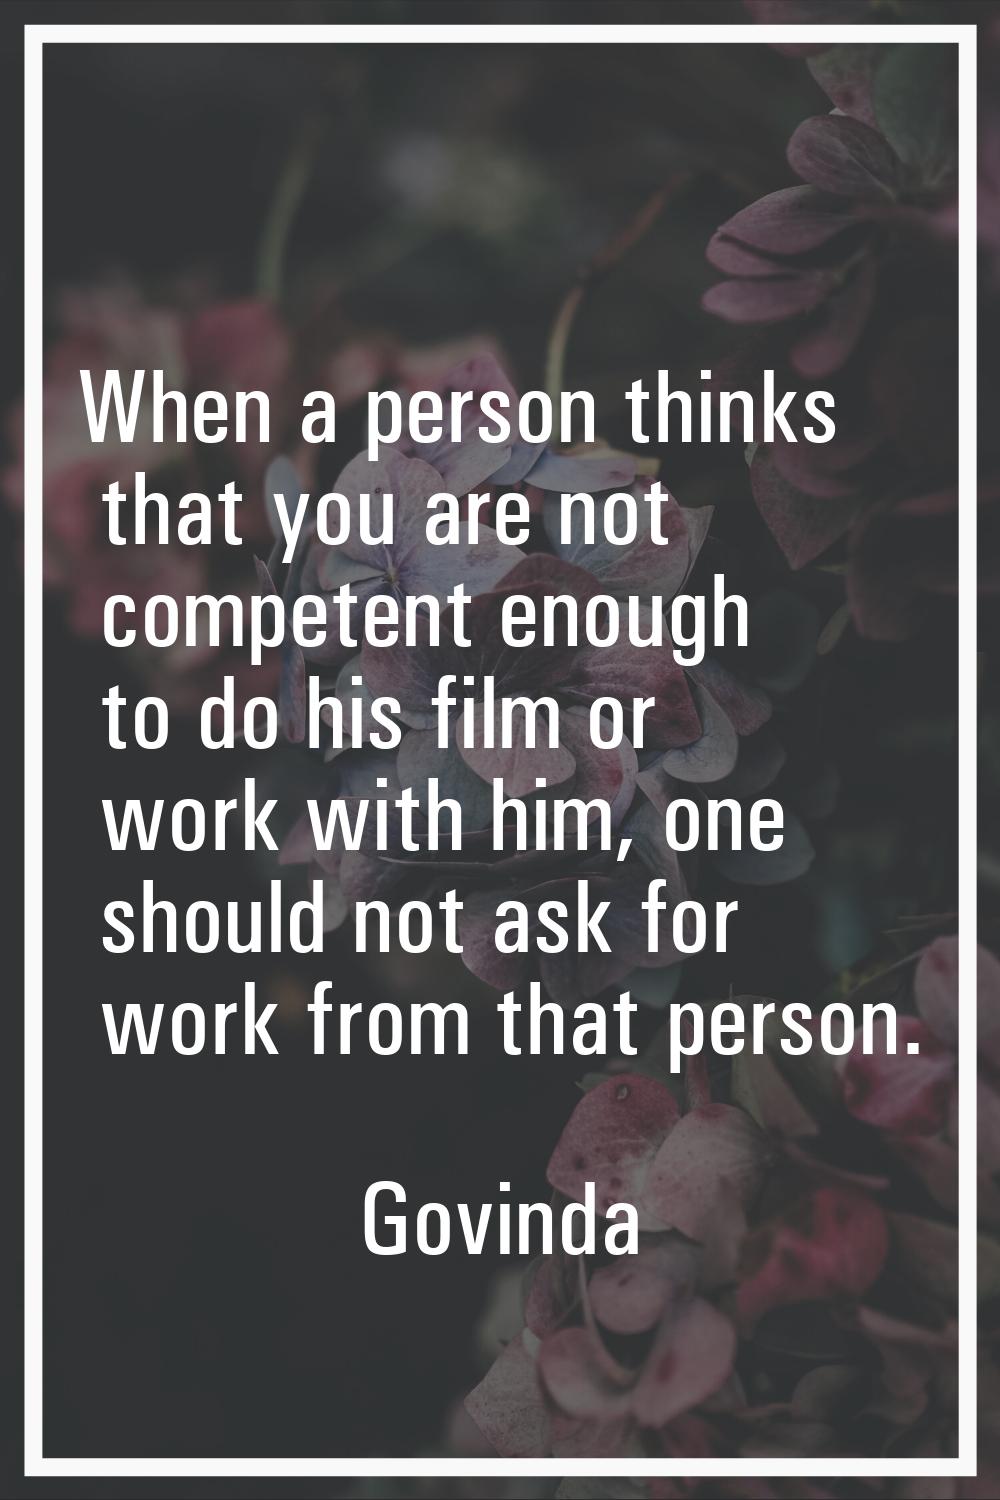 When a person thinks that you are not competent enough to do his film or work with him, one should 